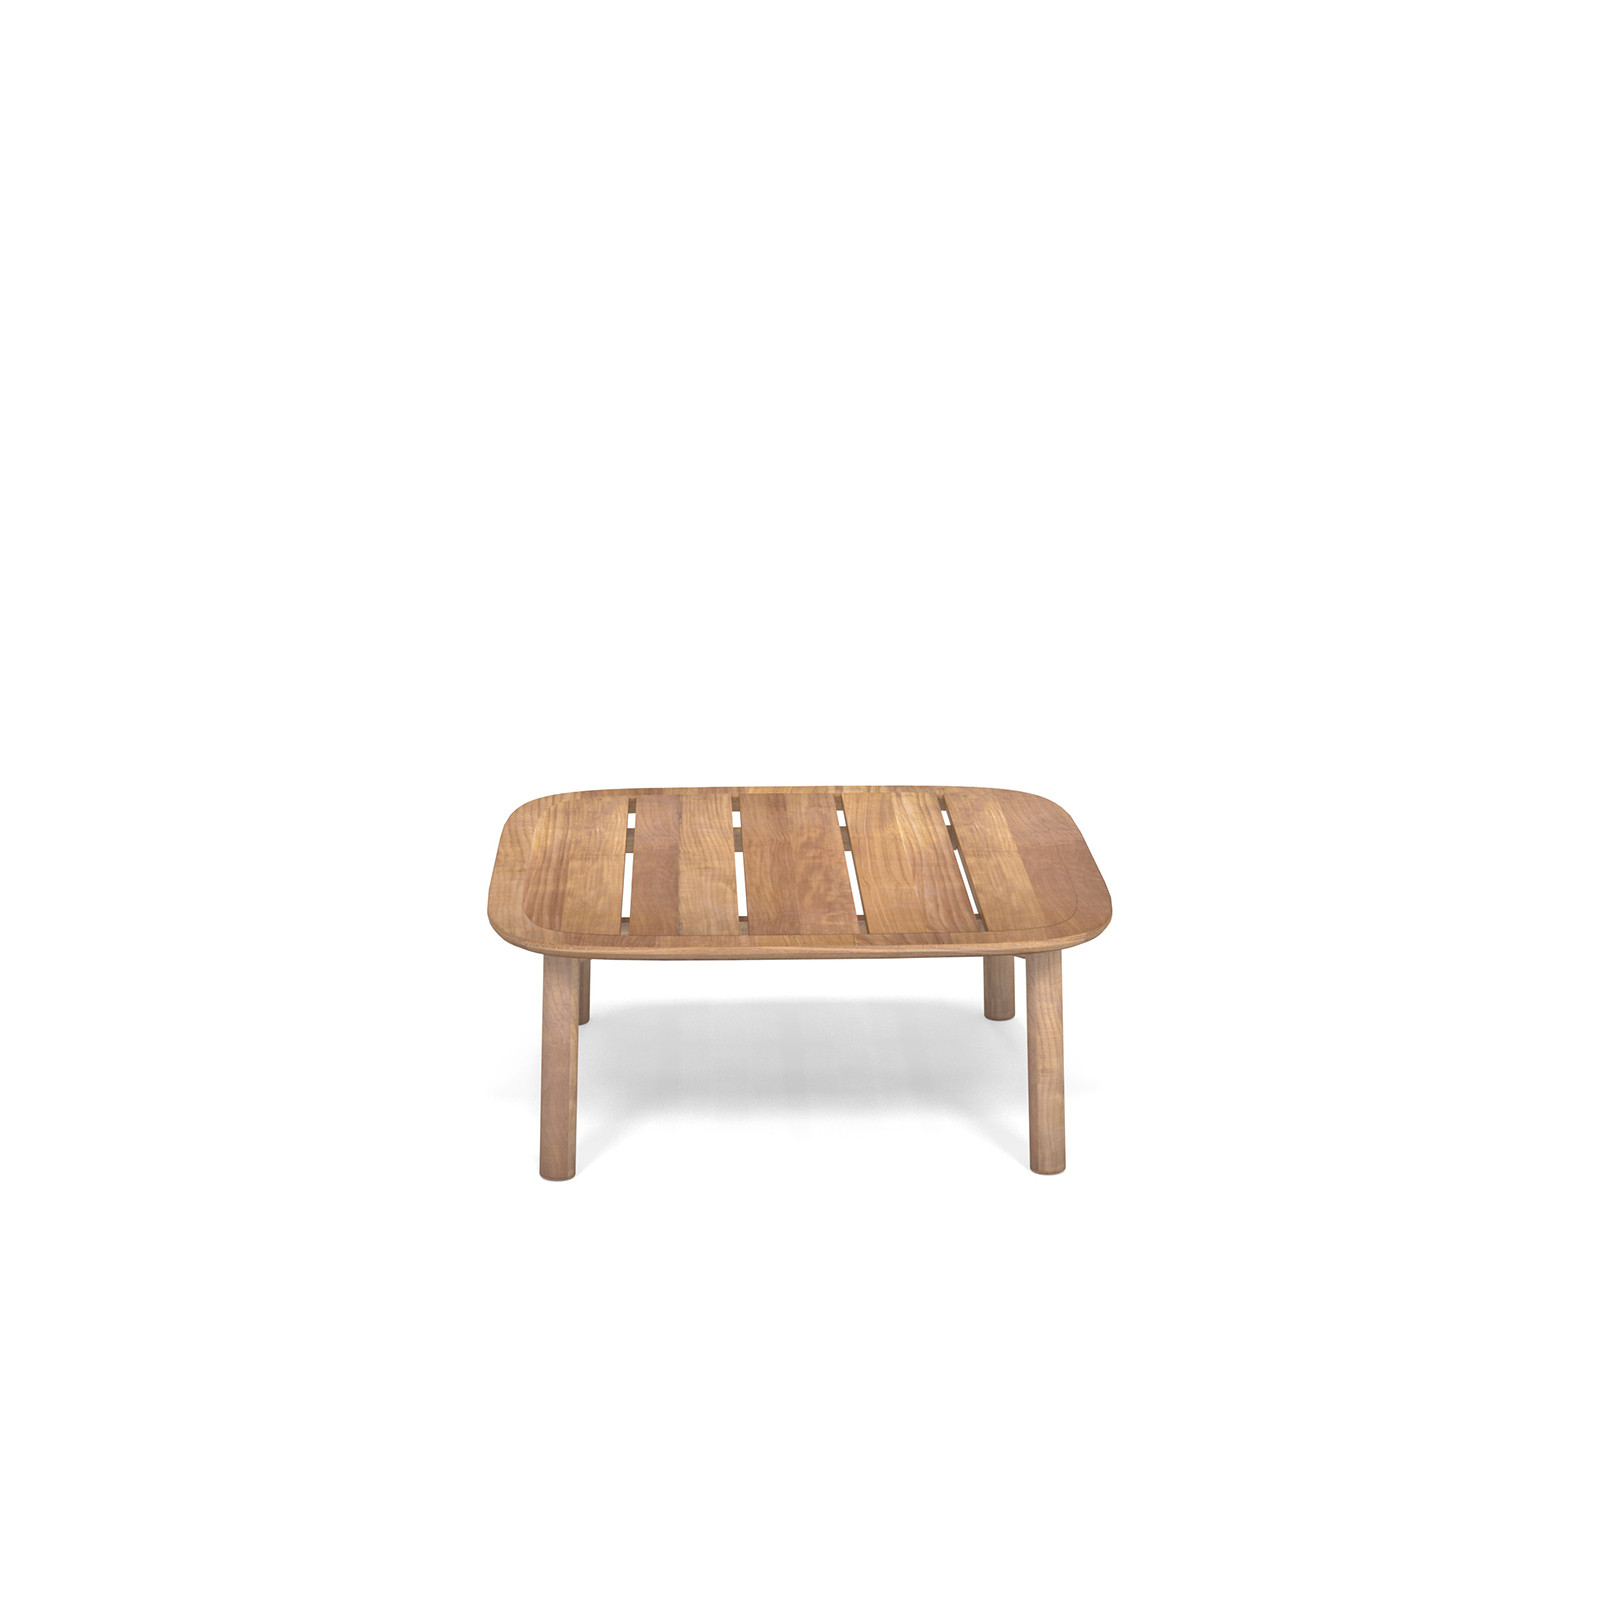 TWINS OCCASIONAL TABLE